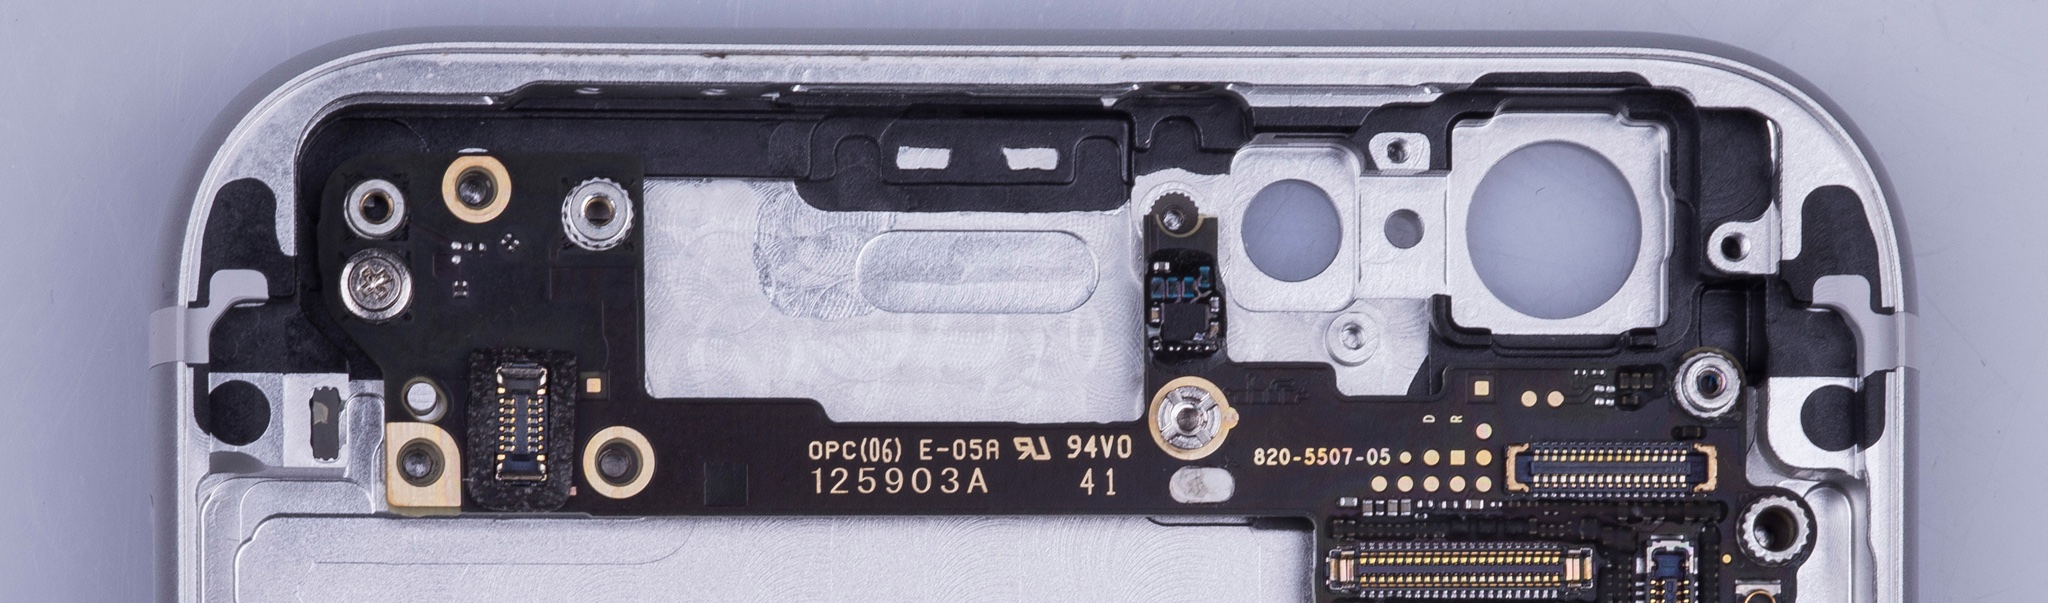 photo of Analysis of ‘iPhone 6s’ logic board suggests improved NFC, 16GB base model and more image